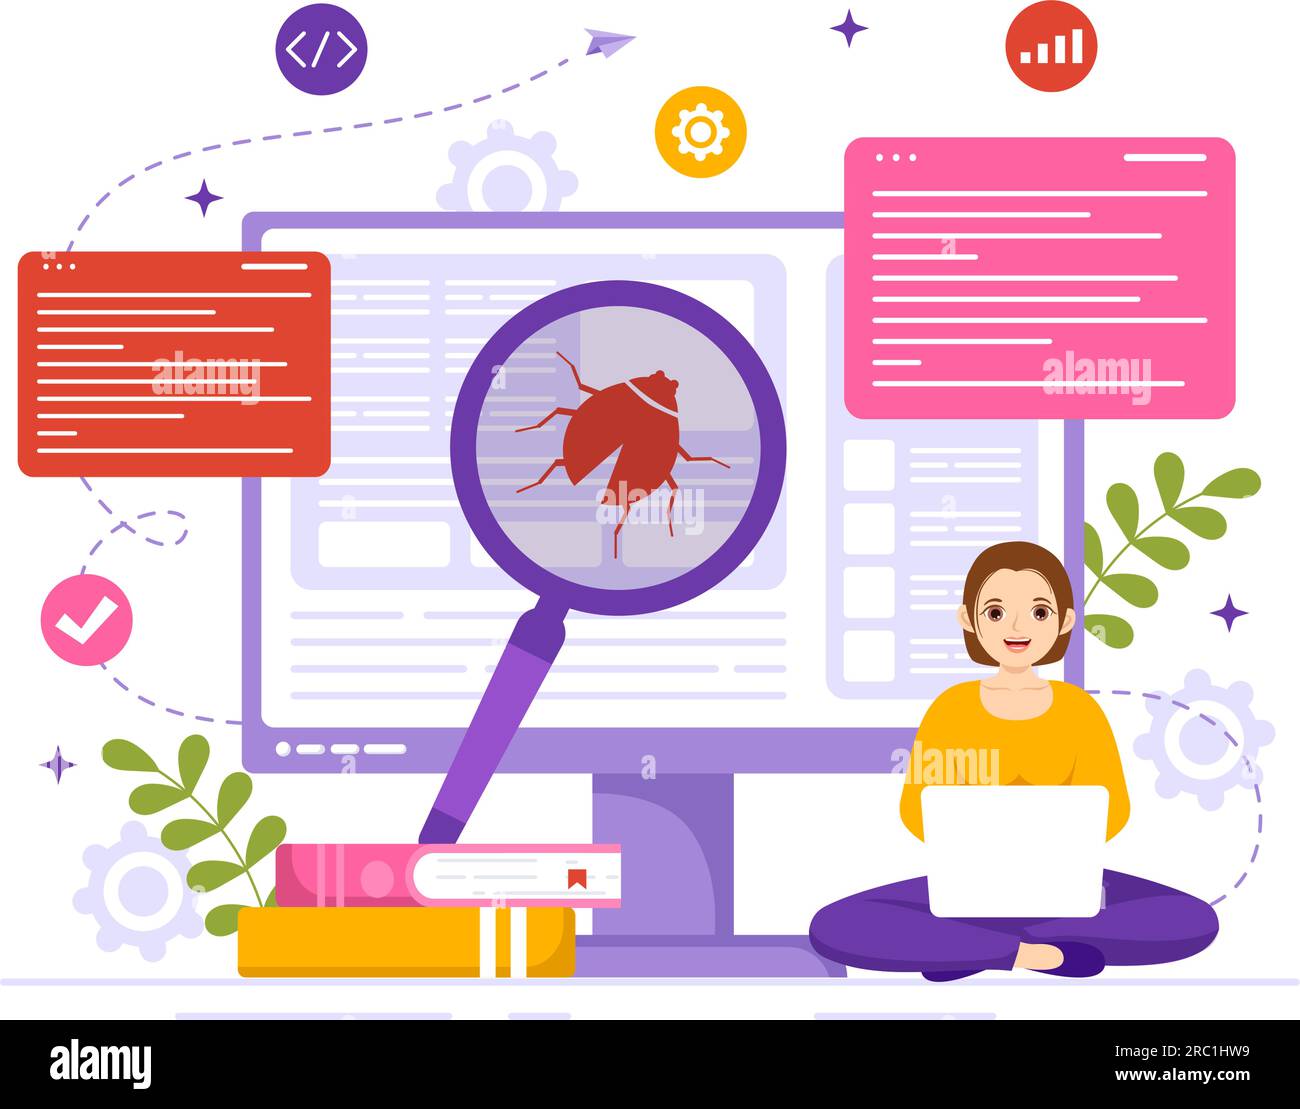 Software Testing Vector Illustration with Application Engineering, Debugging Development Process, Programming and Coding in Hand Drawn Templates Stock Vector